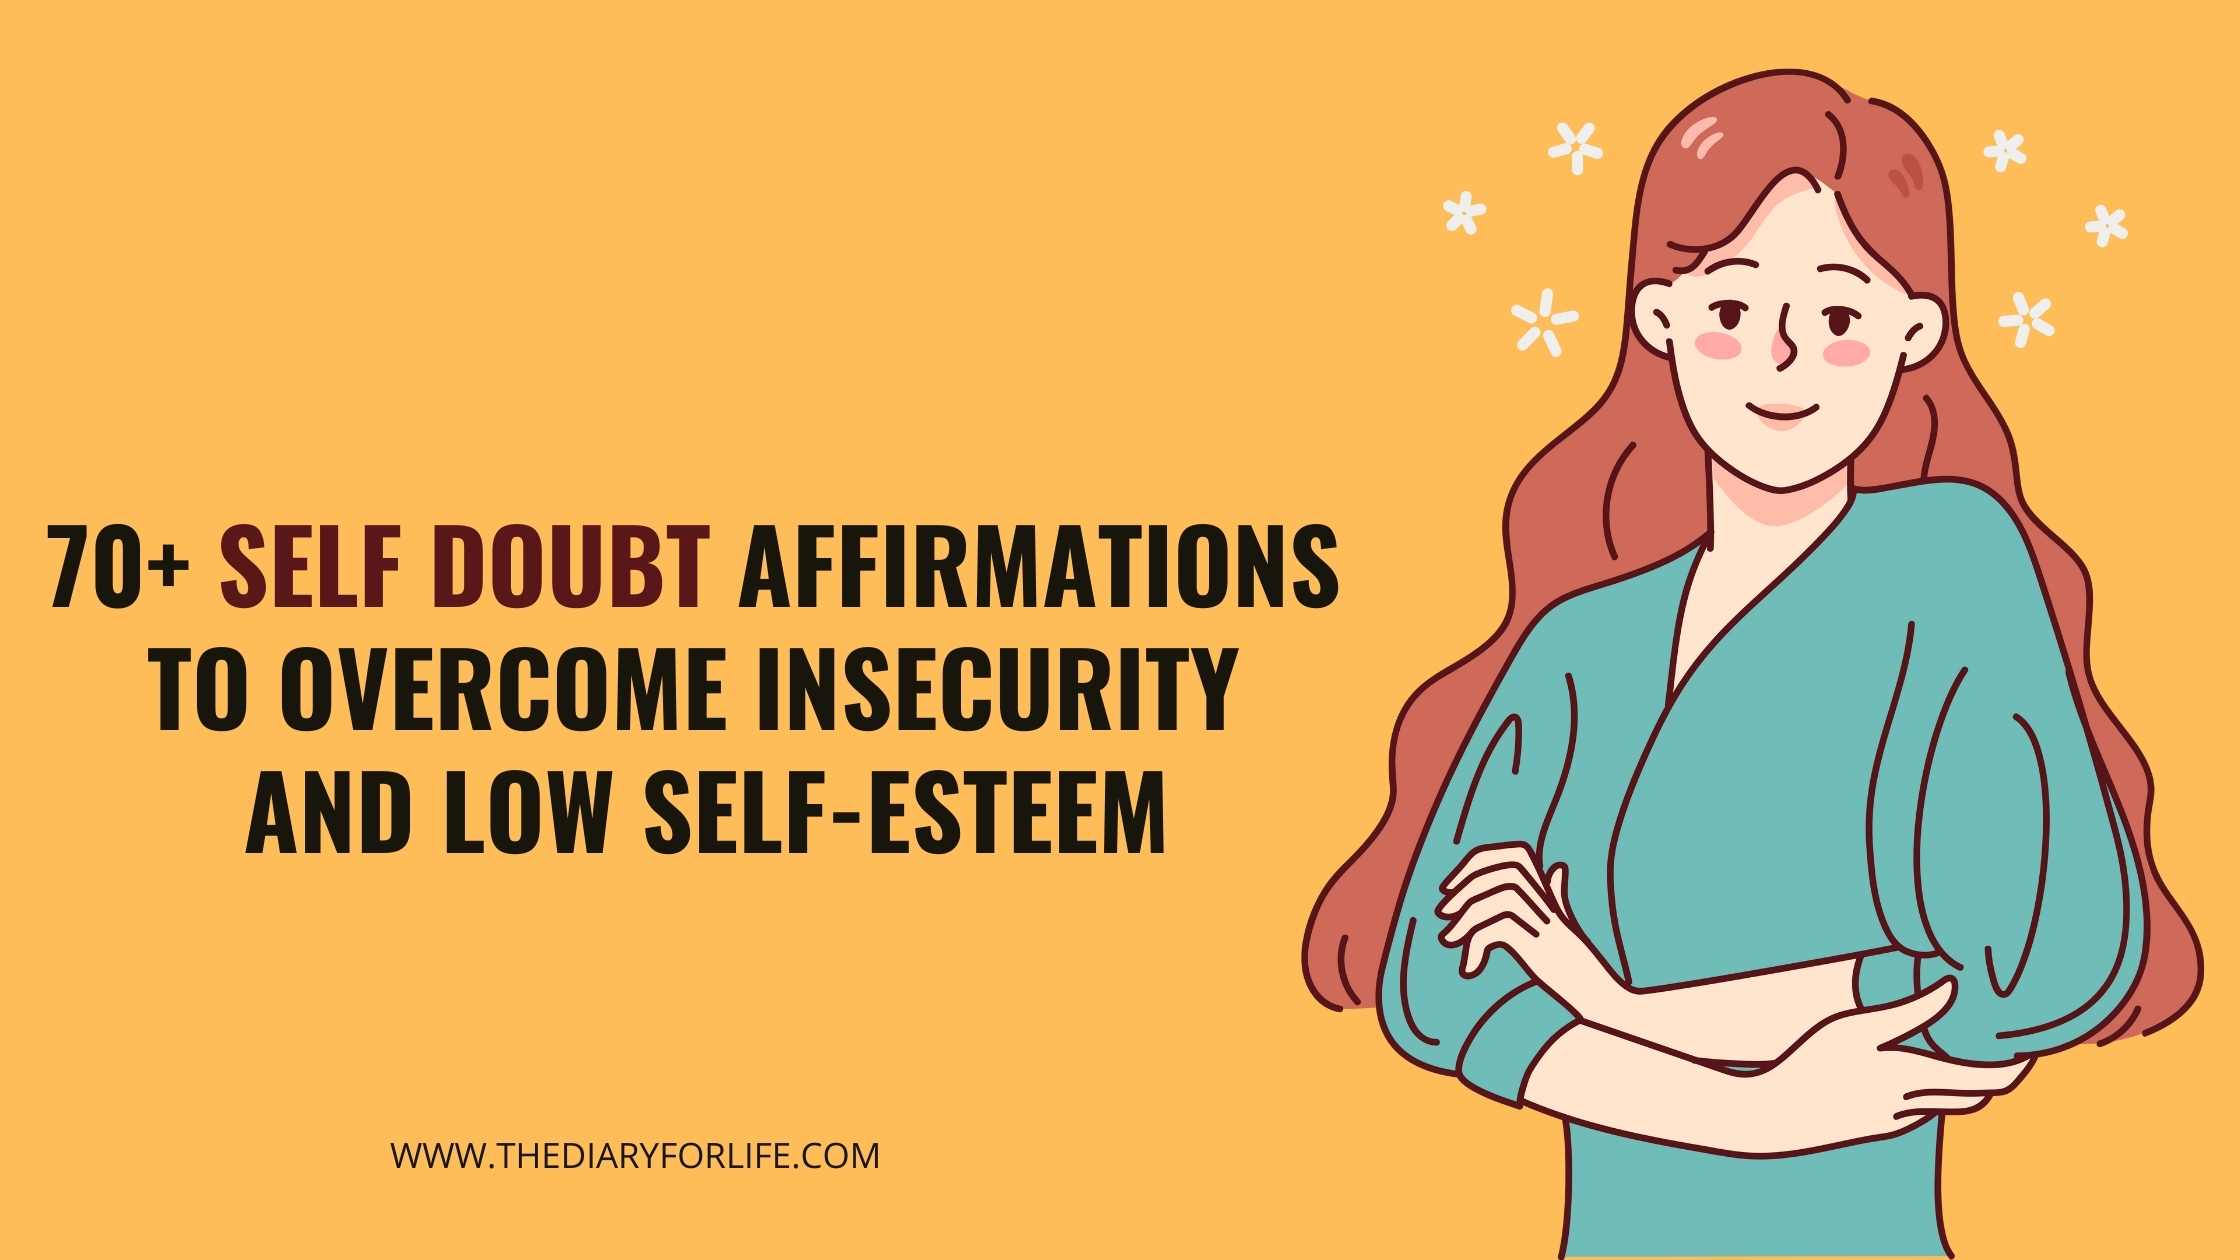 70+ Self Doubt Affirmations To Overcome Insecurity And Low Self-Esteem